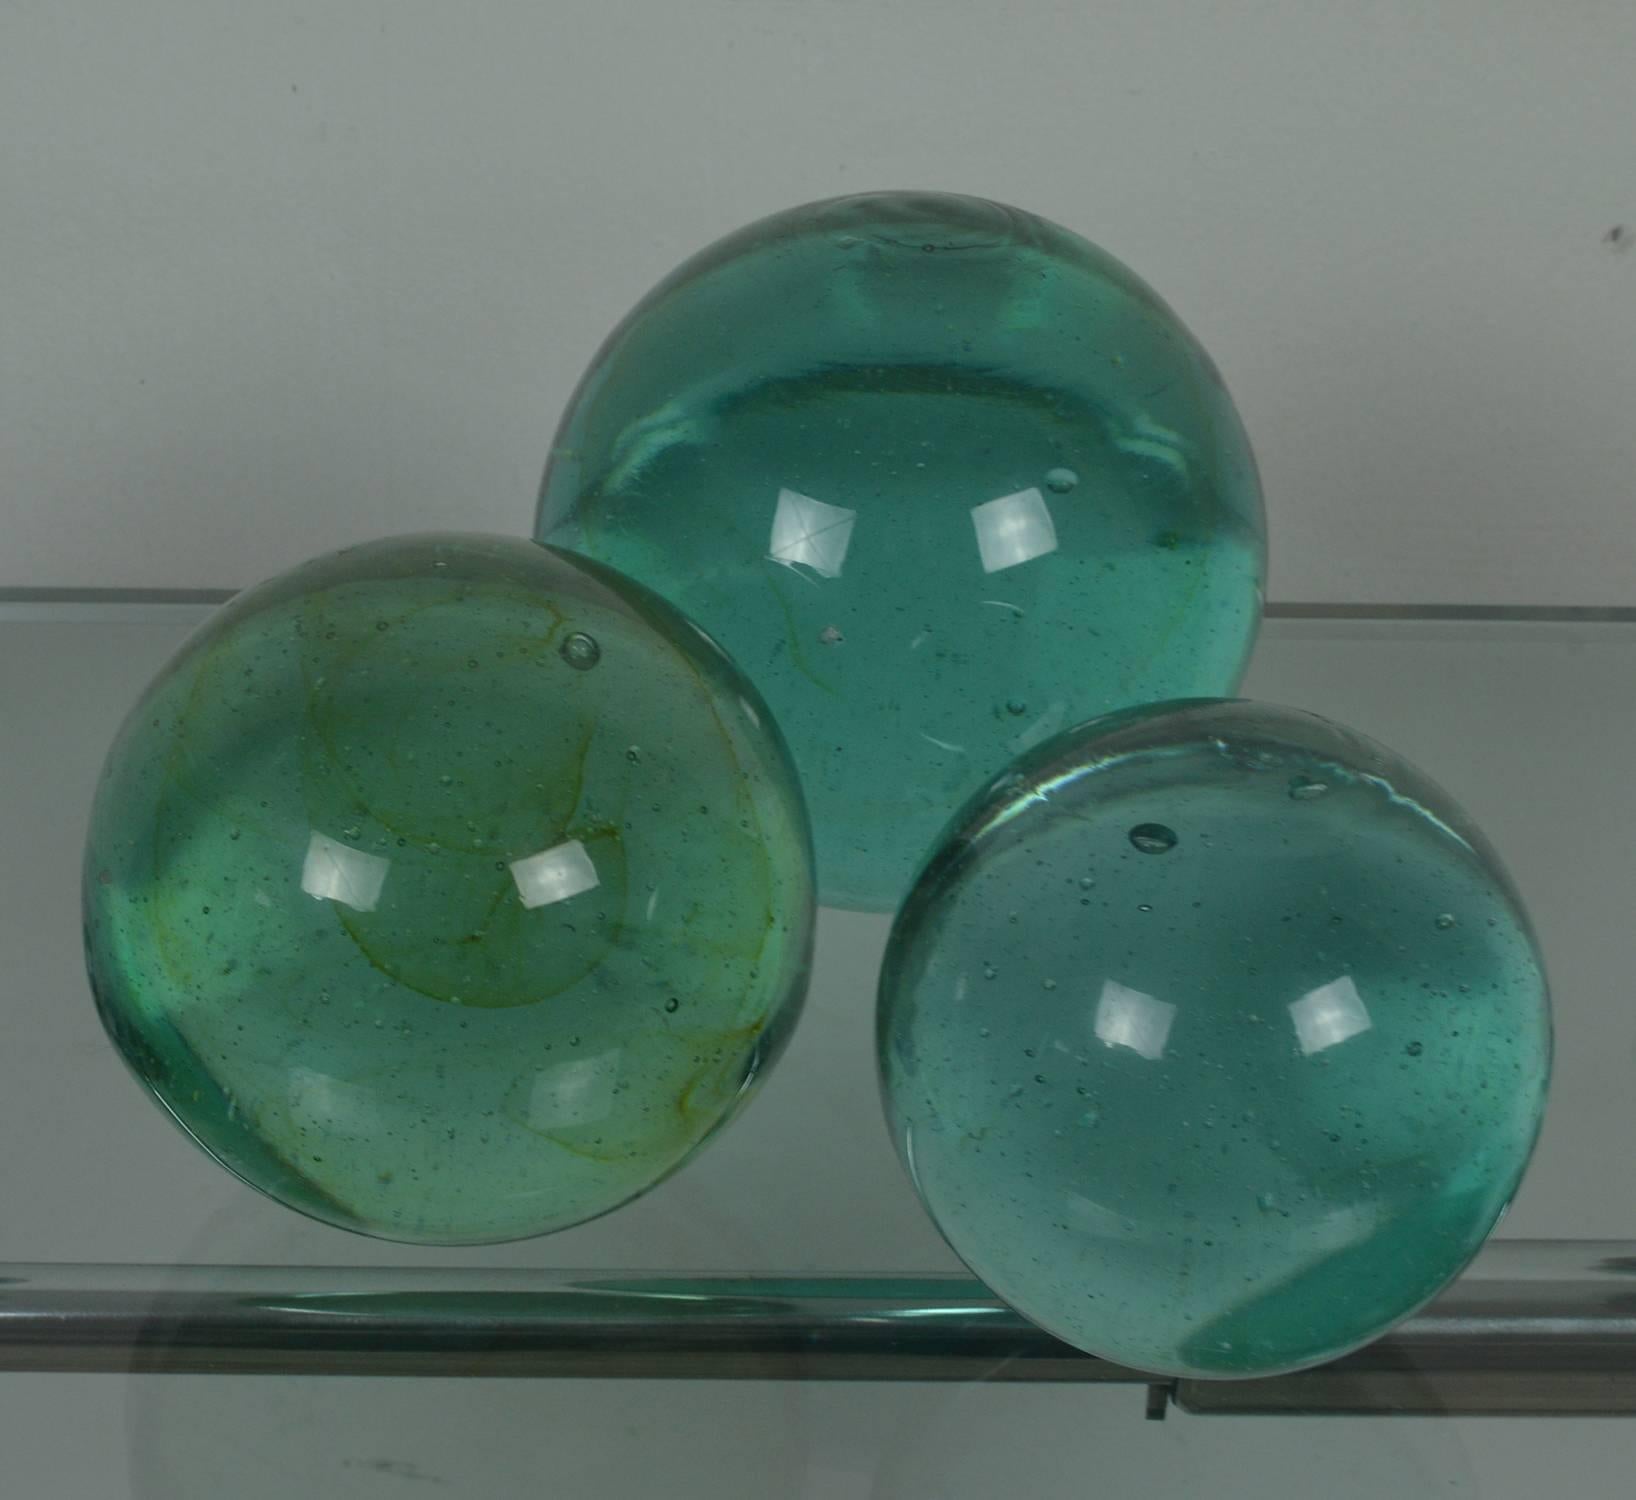 Wonderful pieces of green glass with a bubble effect interior.

Subtle differences in shades of green.

Difficult to date precisely. There are no pontil marks on the bottom. I have dated them 1980 but they could be older.

The measurement given